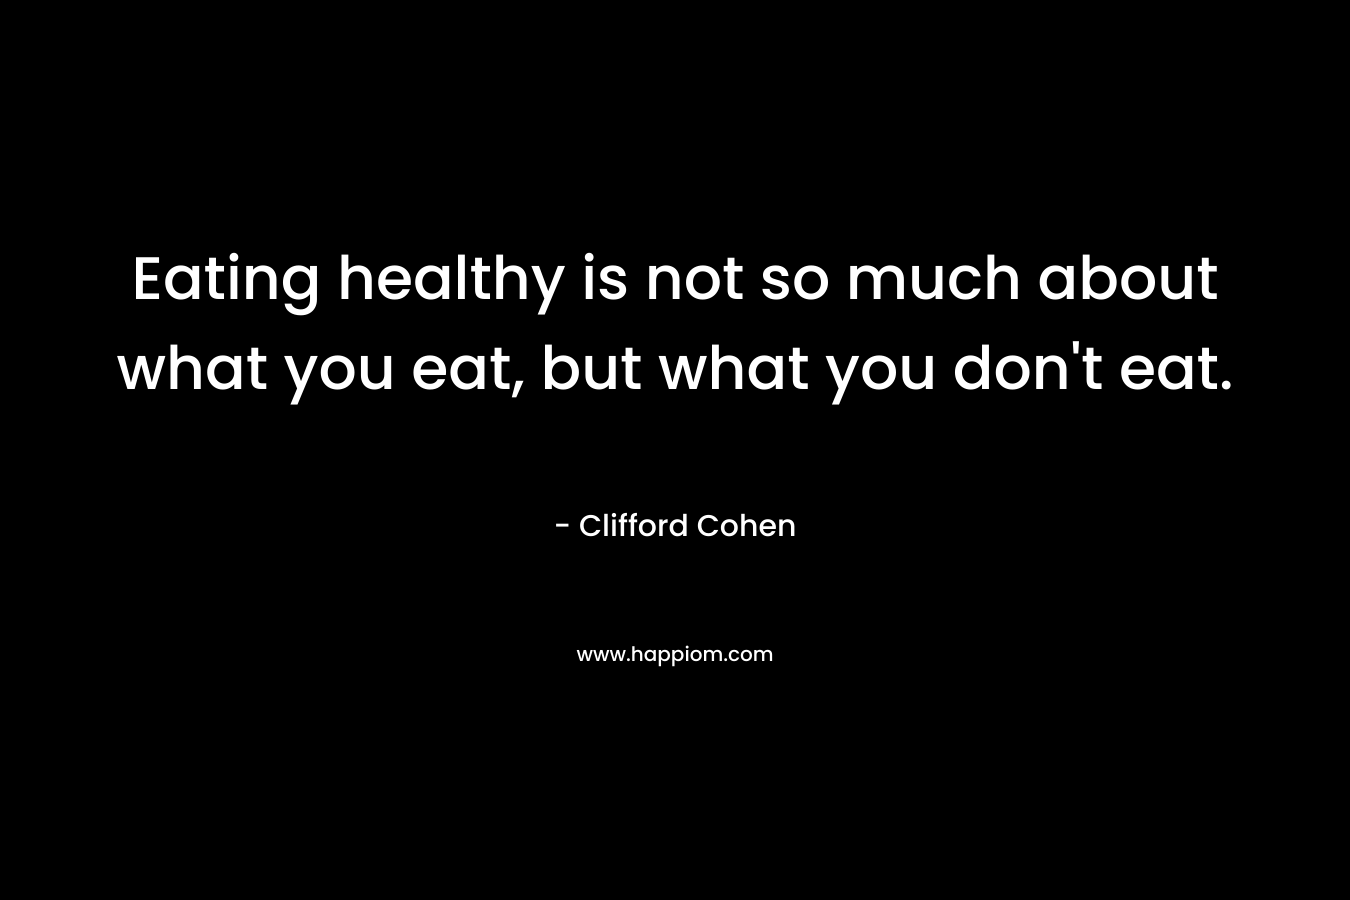 Eating healthy is not so much about what you eat, but what you don’t eat. – Clifford Cohen